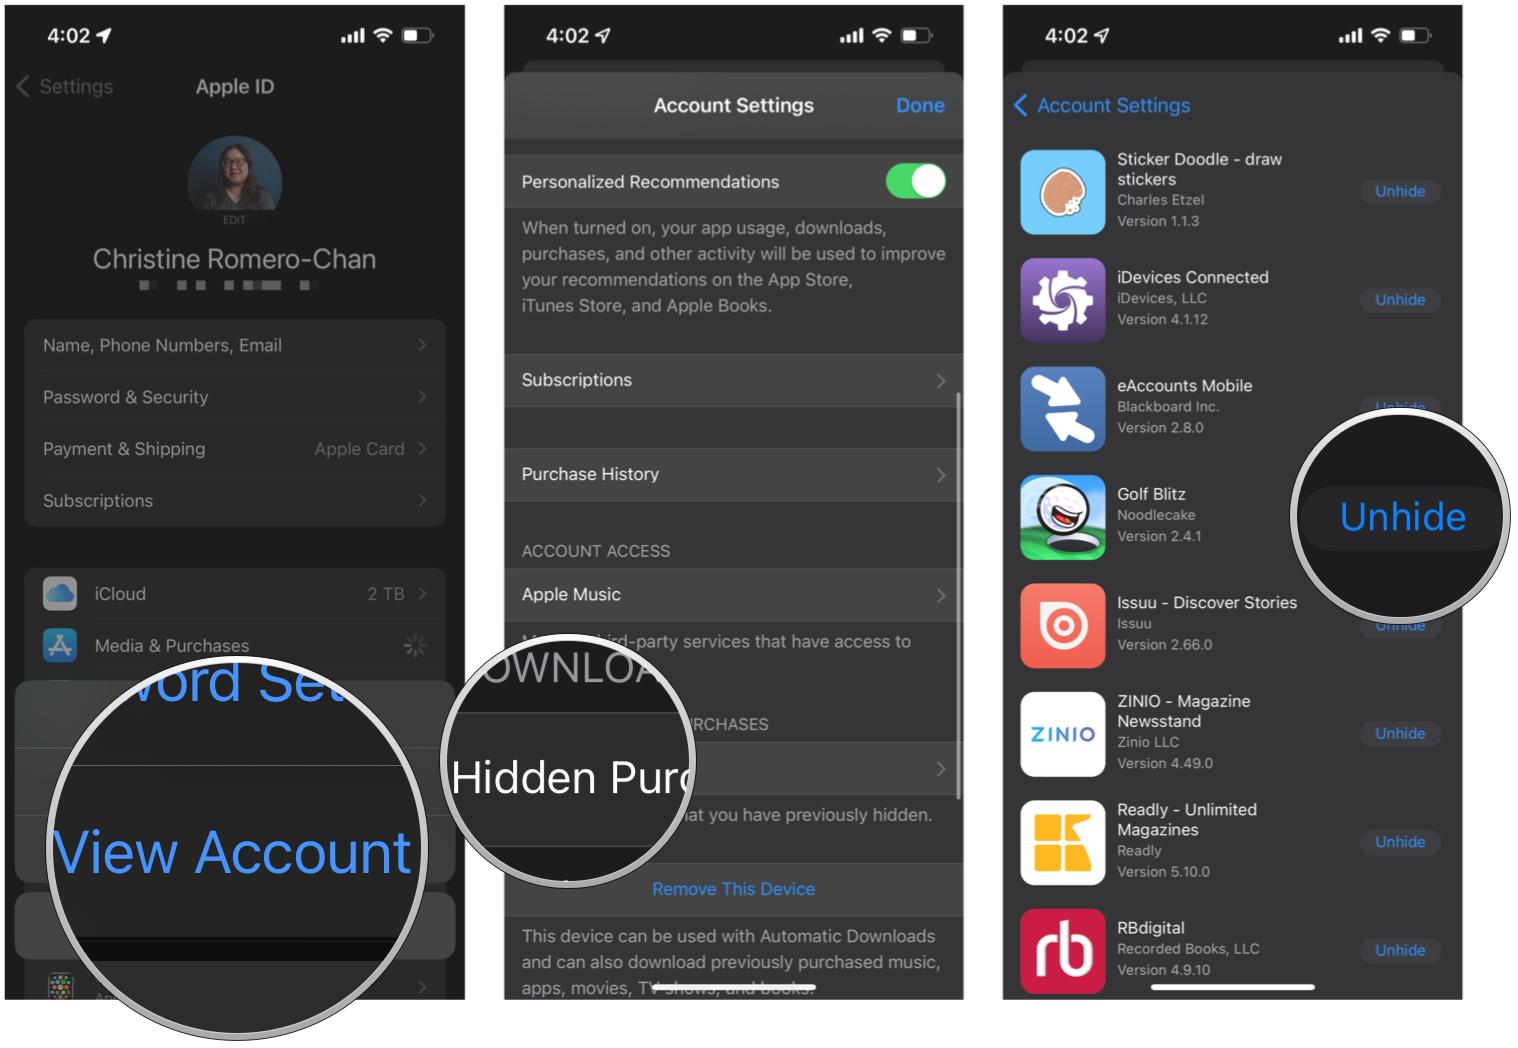 View hidden apps and unhide them on iPhone by showing: Tap View Account, tap Hidden Purchases, tap Unhide on what you want to unhide